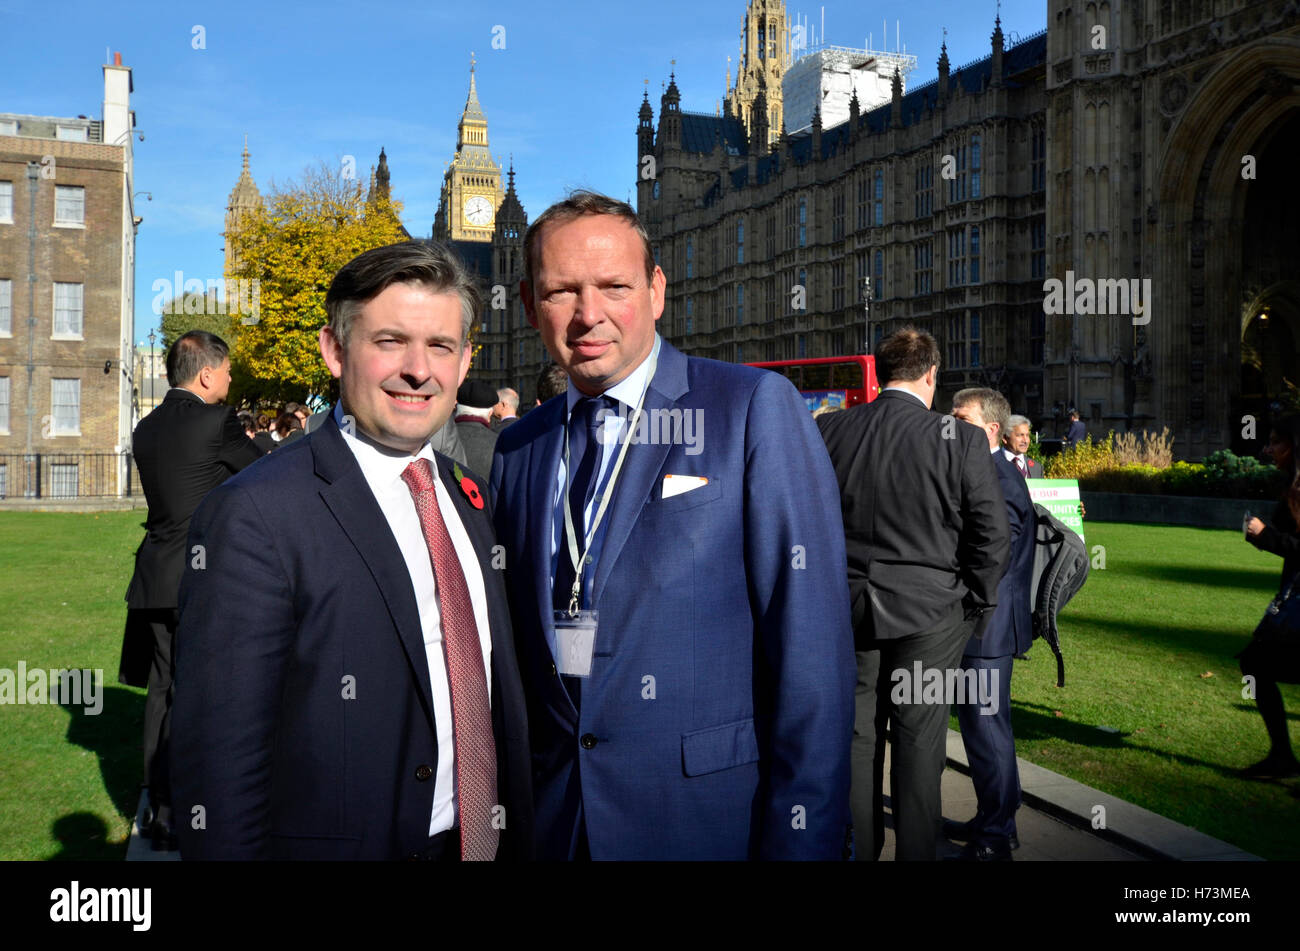 London, UK. 2nd November, 2016. Shadow Health Secretary Jon Ashworth MP at the front of the queue to campaign against funding cuts for community pharmacies, before a debate and vote in the House of Commons later in the day. Credit:  PjrNews/Alamy Live News Stock Photo